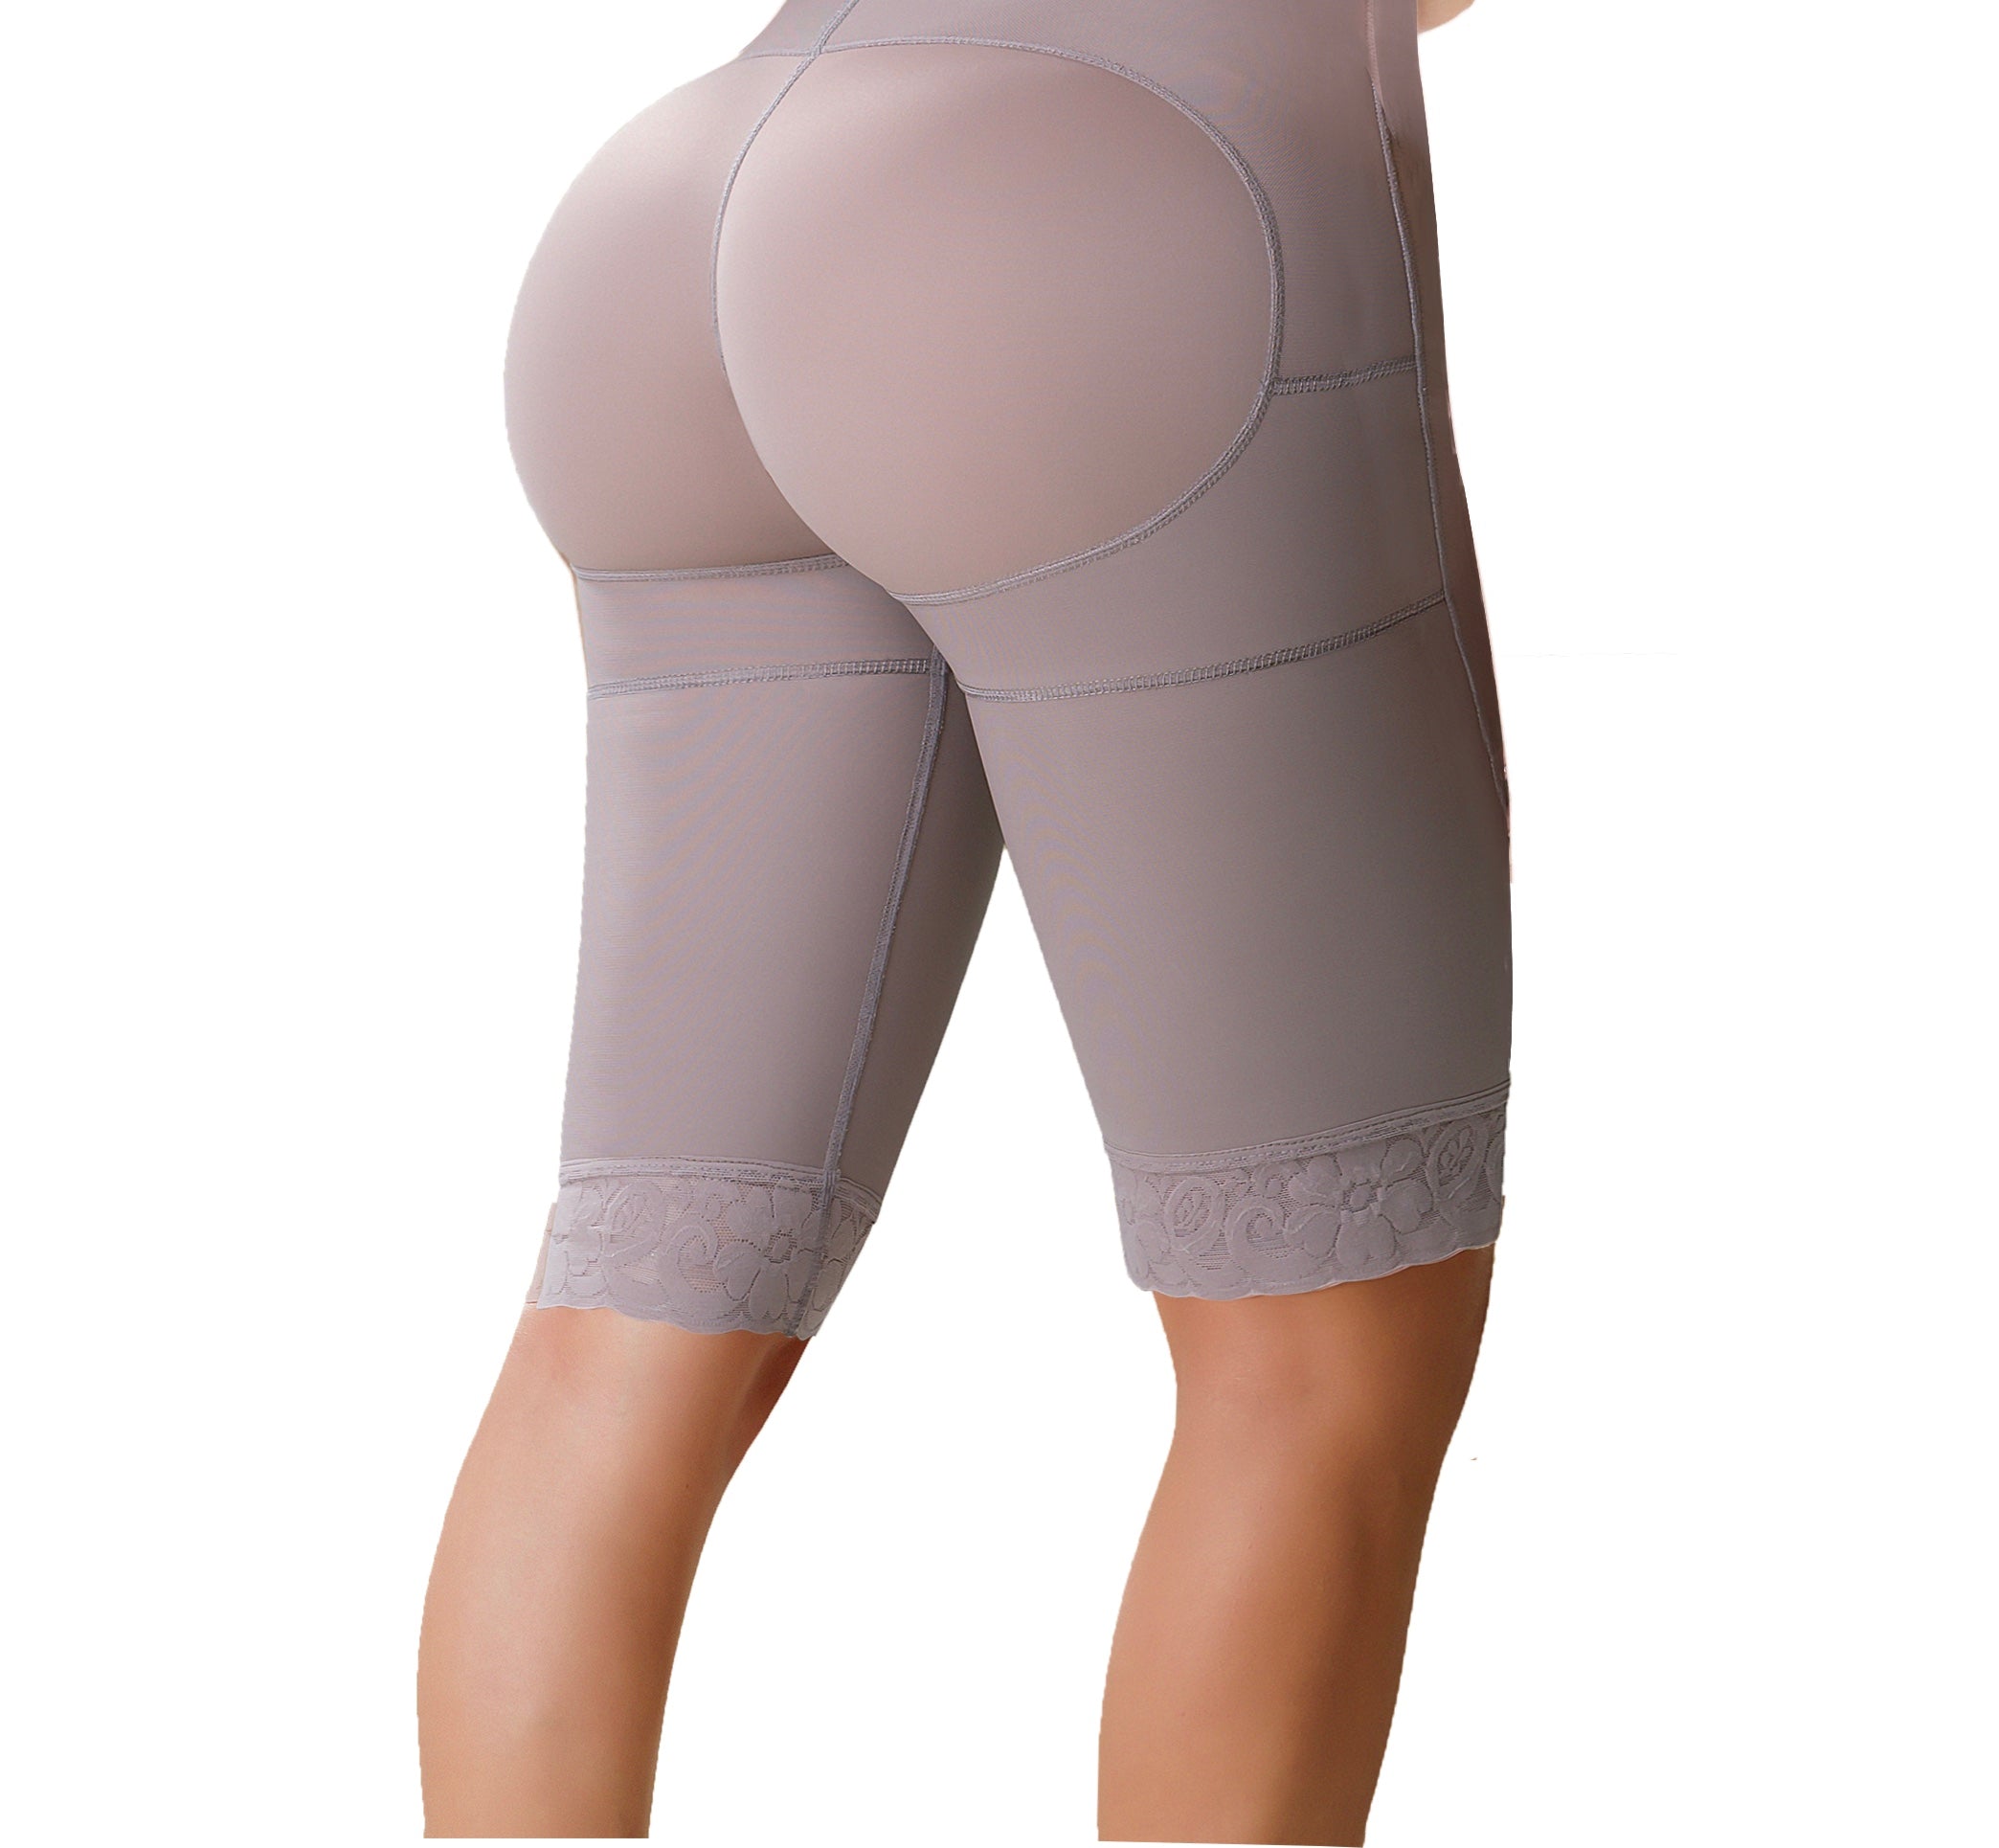 branded Manufacturer, shapewear, Corsets, womens apparel, activewear, hosiery, lingerie, bustiers, intimate apparel, sports wear, back support 